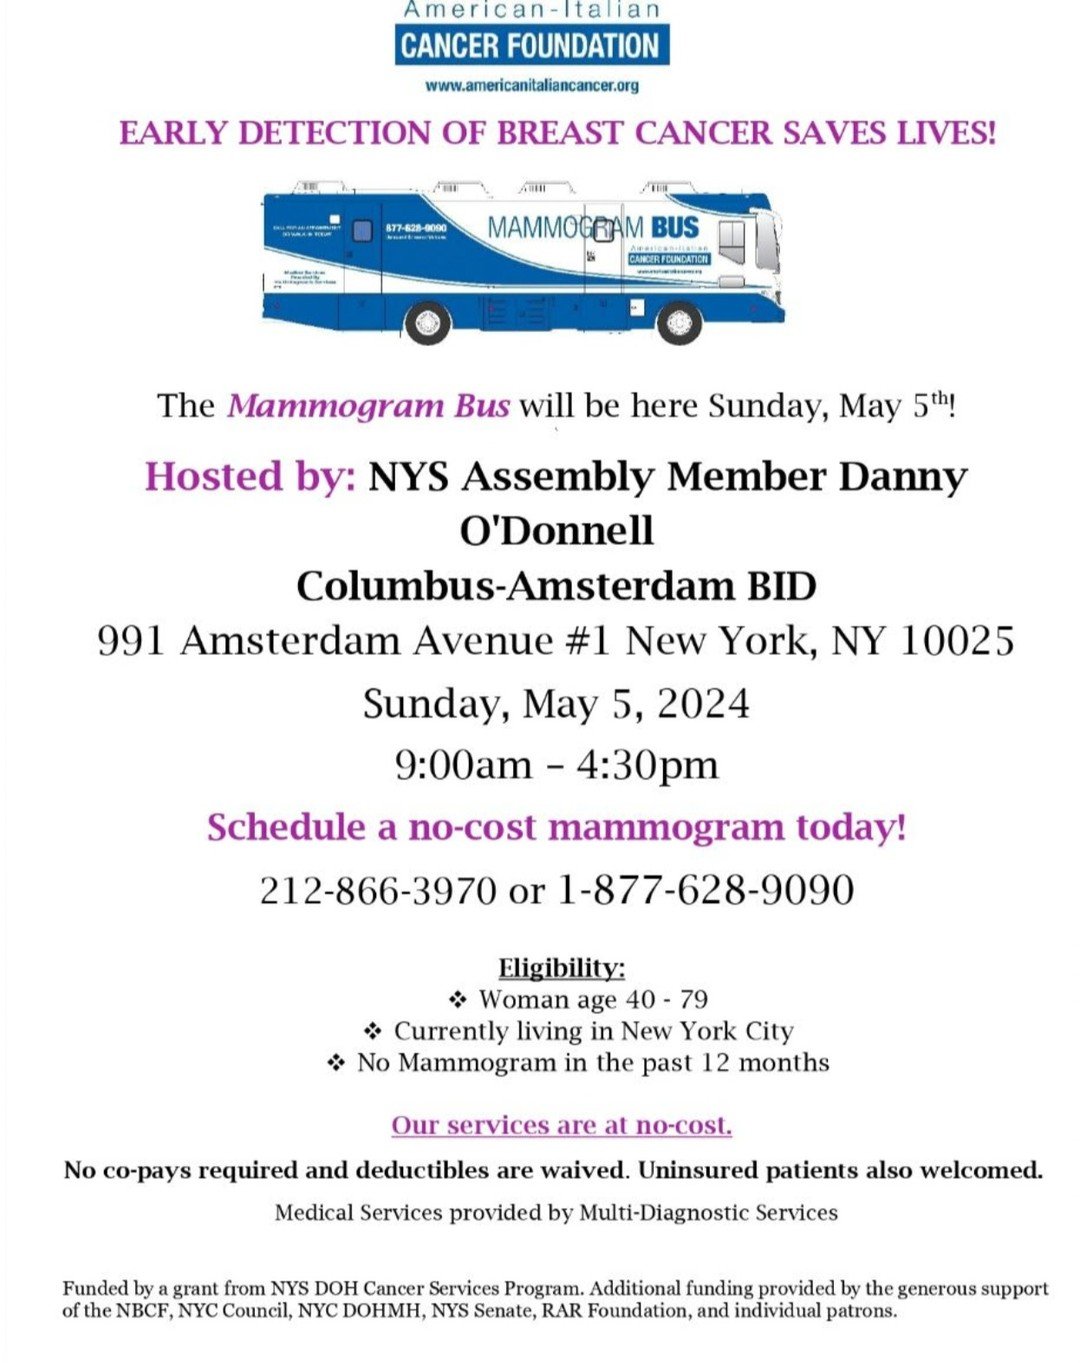 Make sure to sign up for a FREE breast cancer screening through Danny O'Donnell's office on May 5! The mammogram bus will be at our office from 9-4:30 PM during Open Streets. Call 212-866-3970 or 1-877-628-9090 to register. Early detection saves live